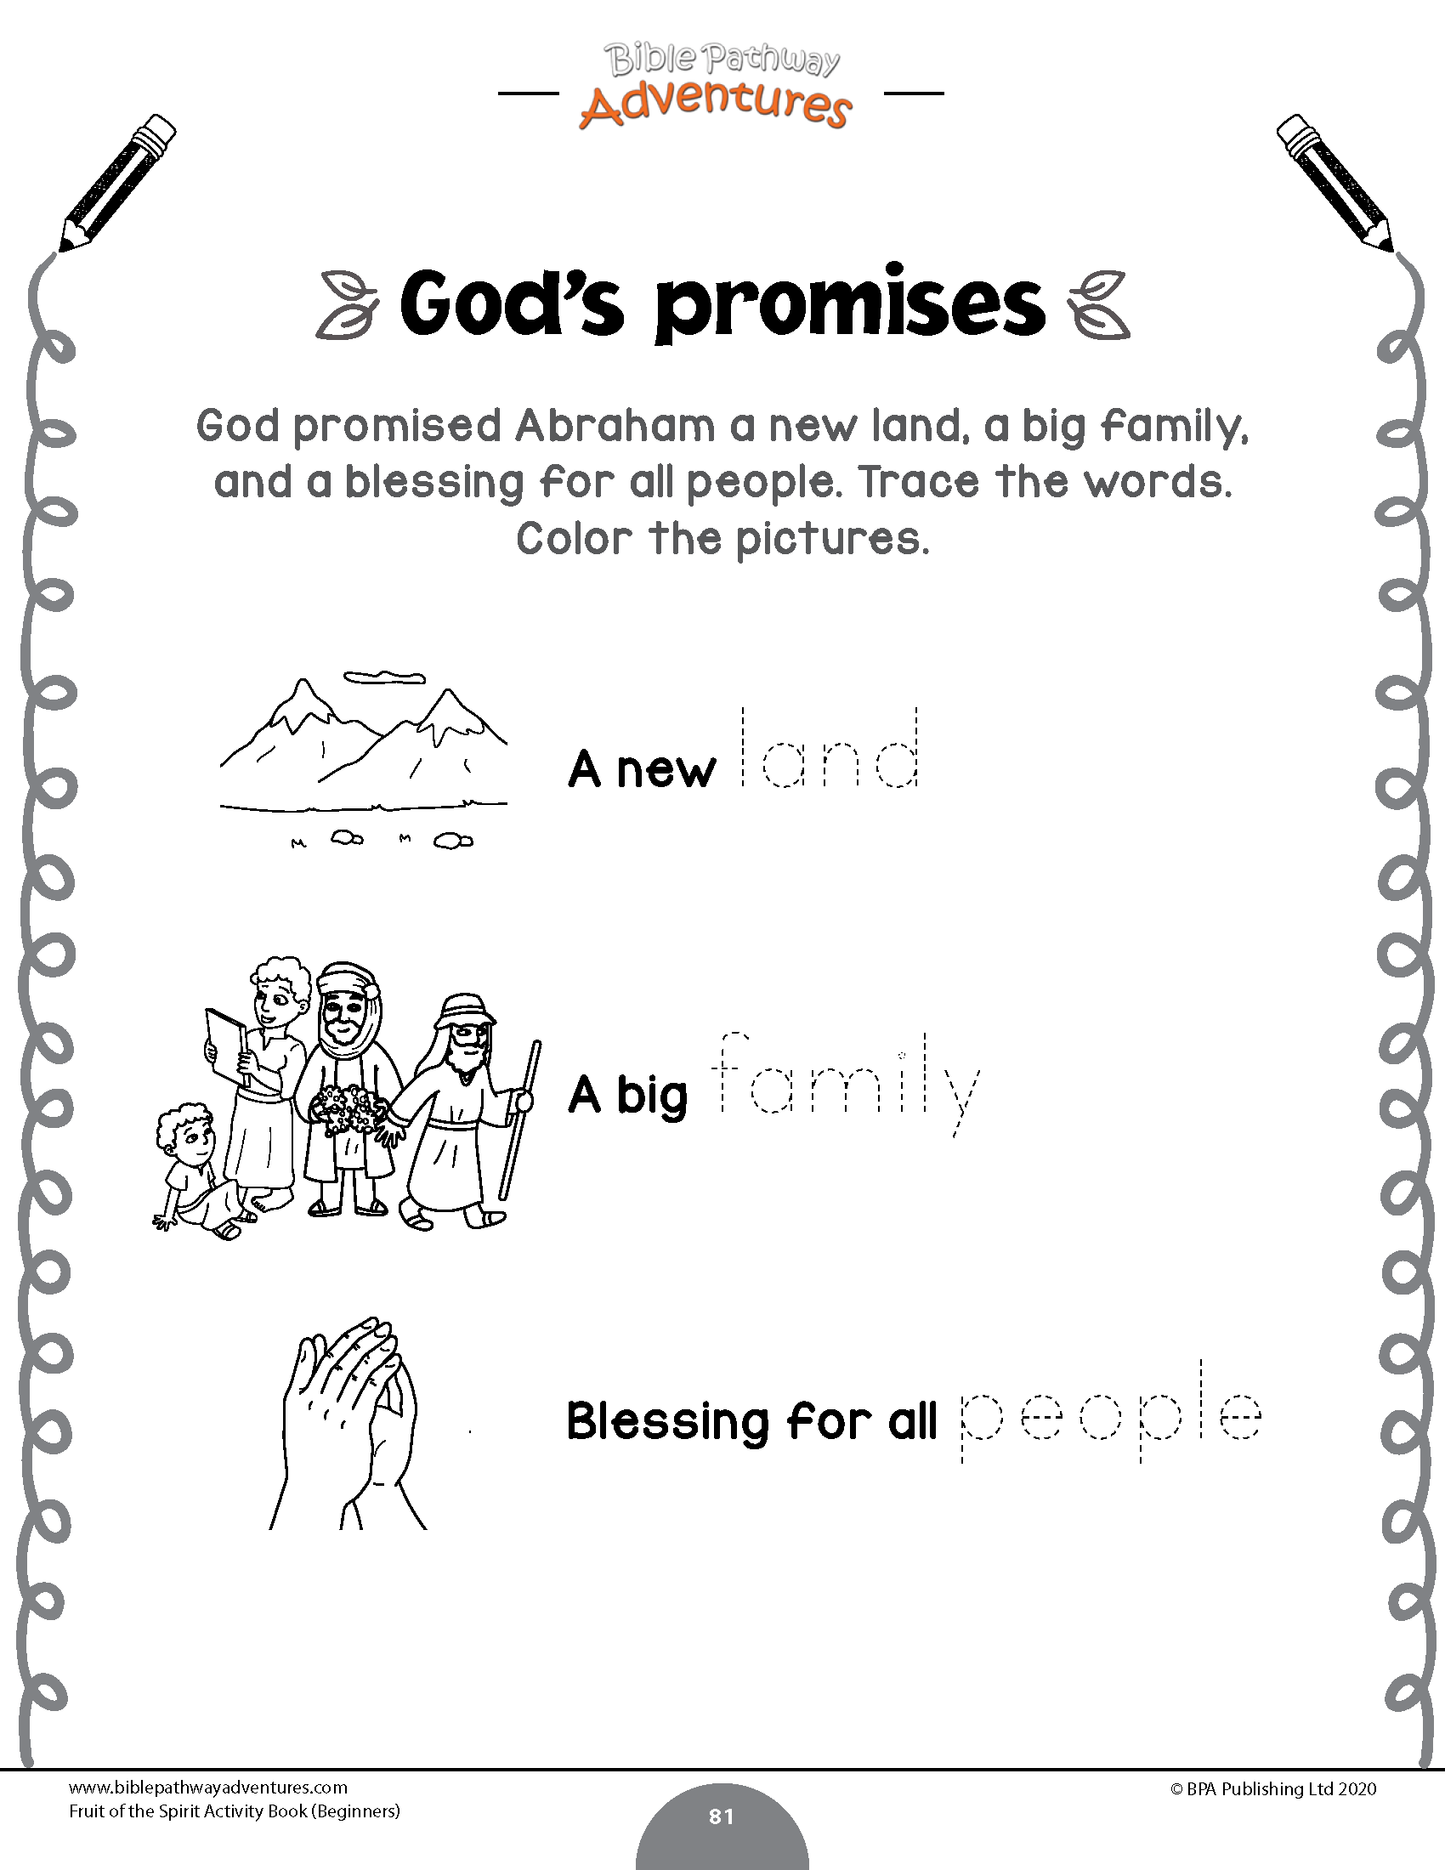 Fruit of the Spirit Activity Book for Beginners (PDF)